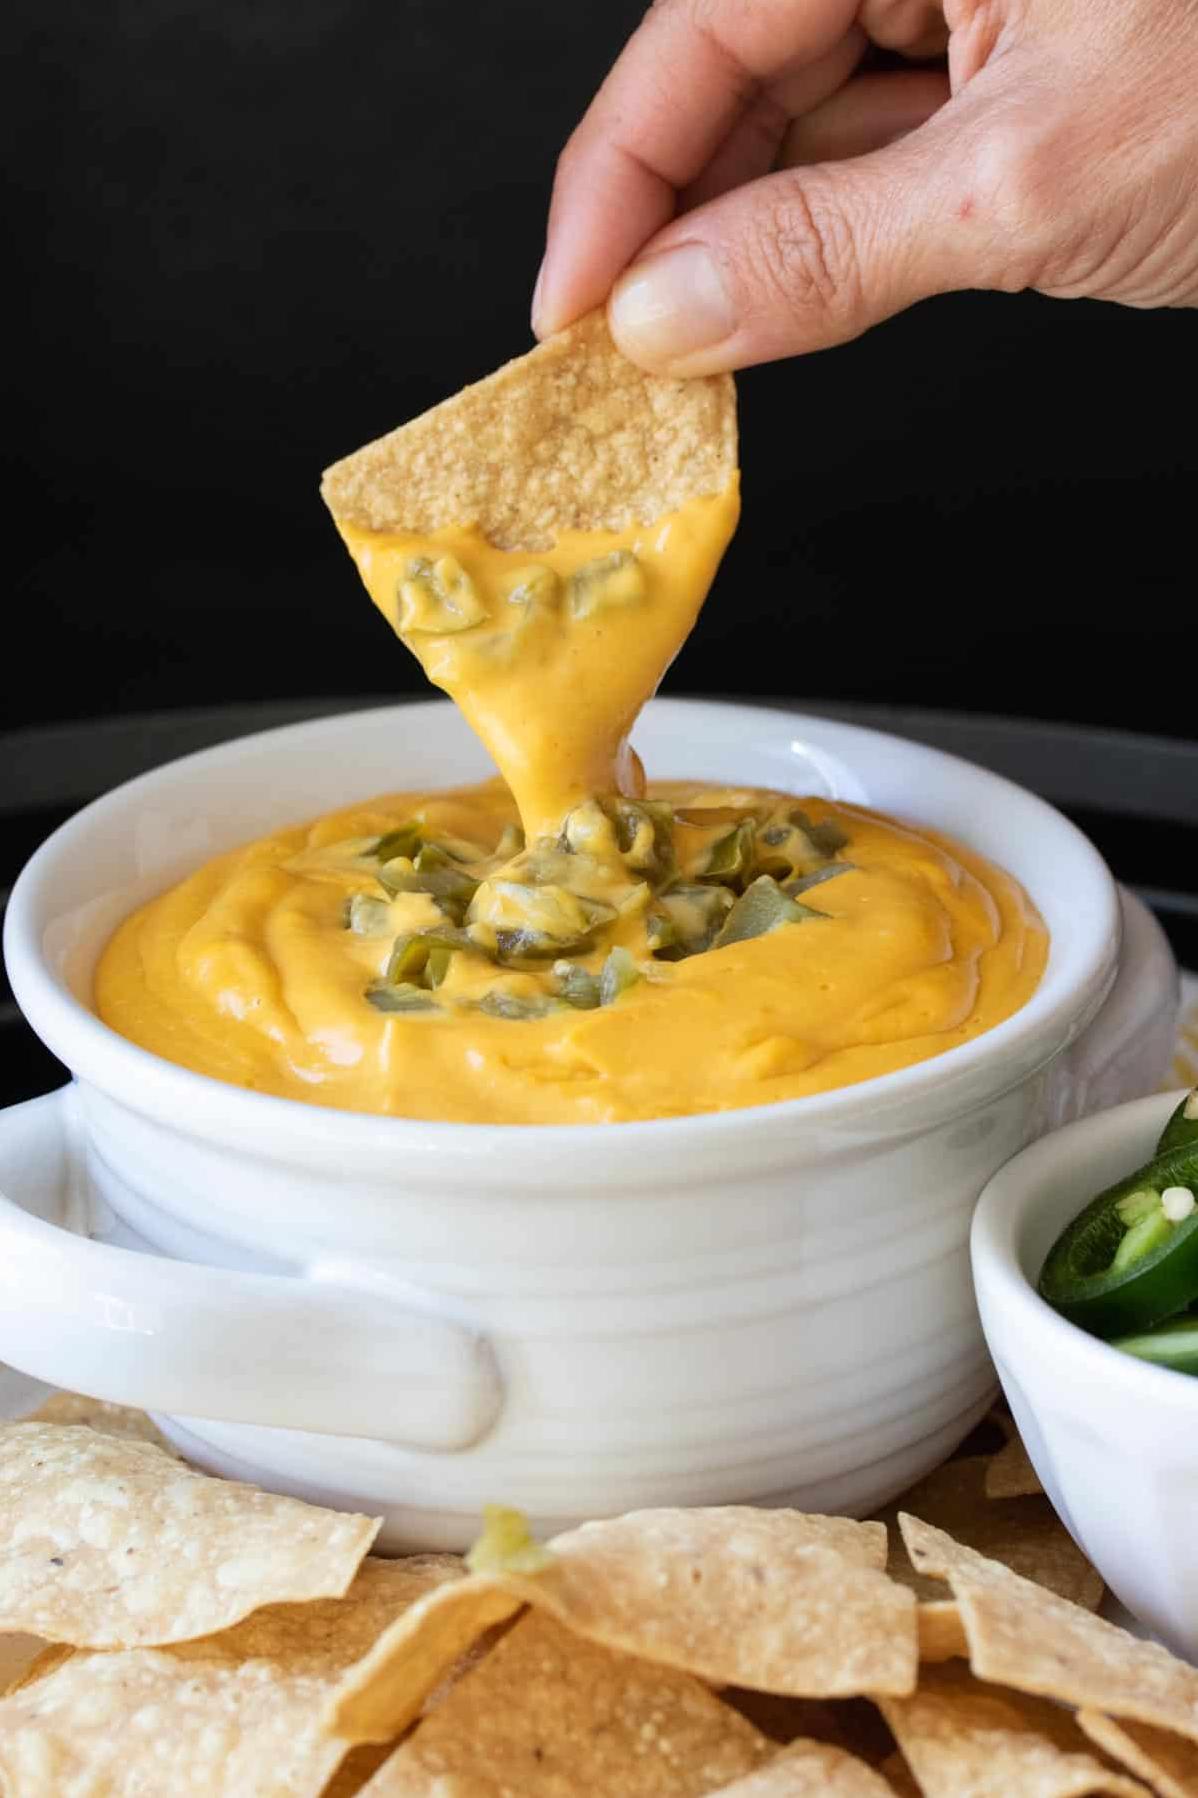  Drizzle our vegan nacho cheese sauce over chips for a tasty snack!